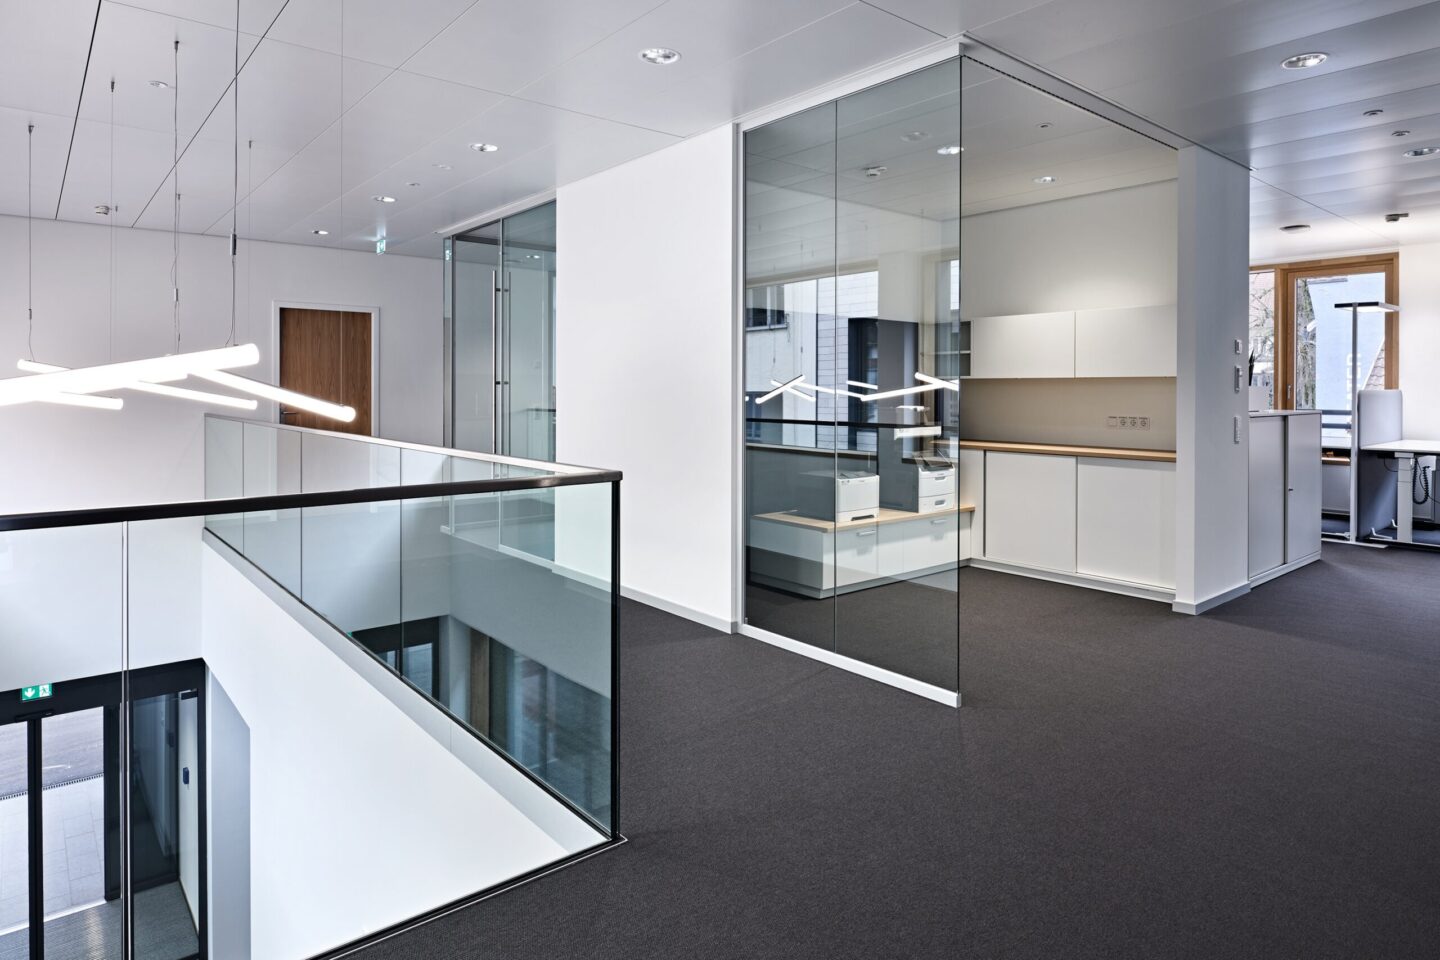 Sparkasse Hochrhein │ system walls from feco │ glass elements with anodised aluminum profiles